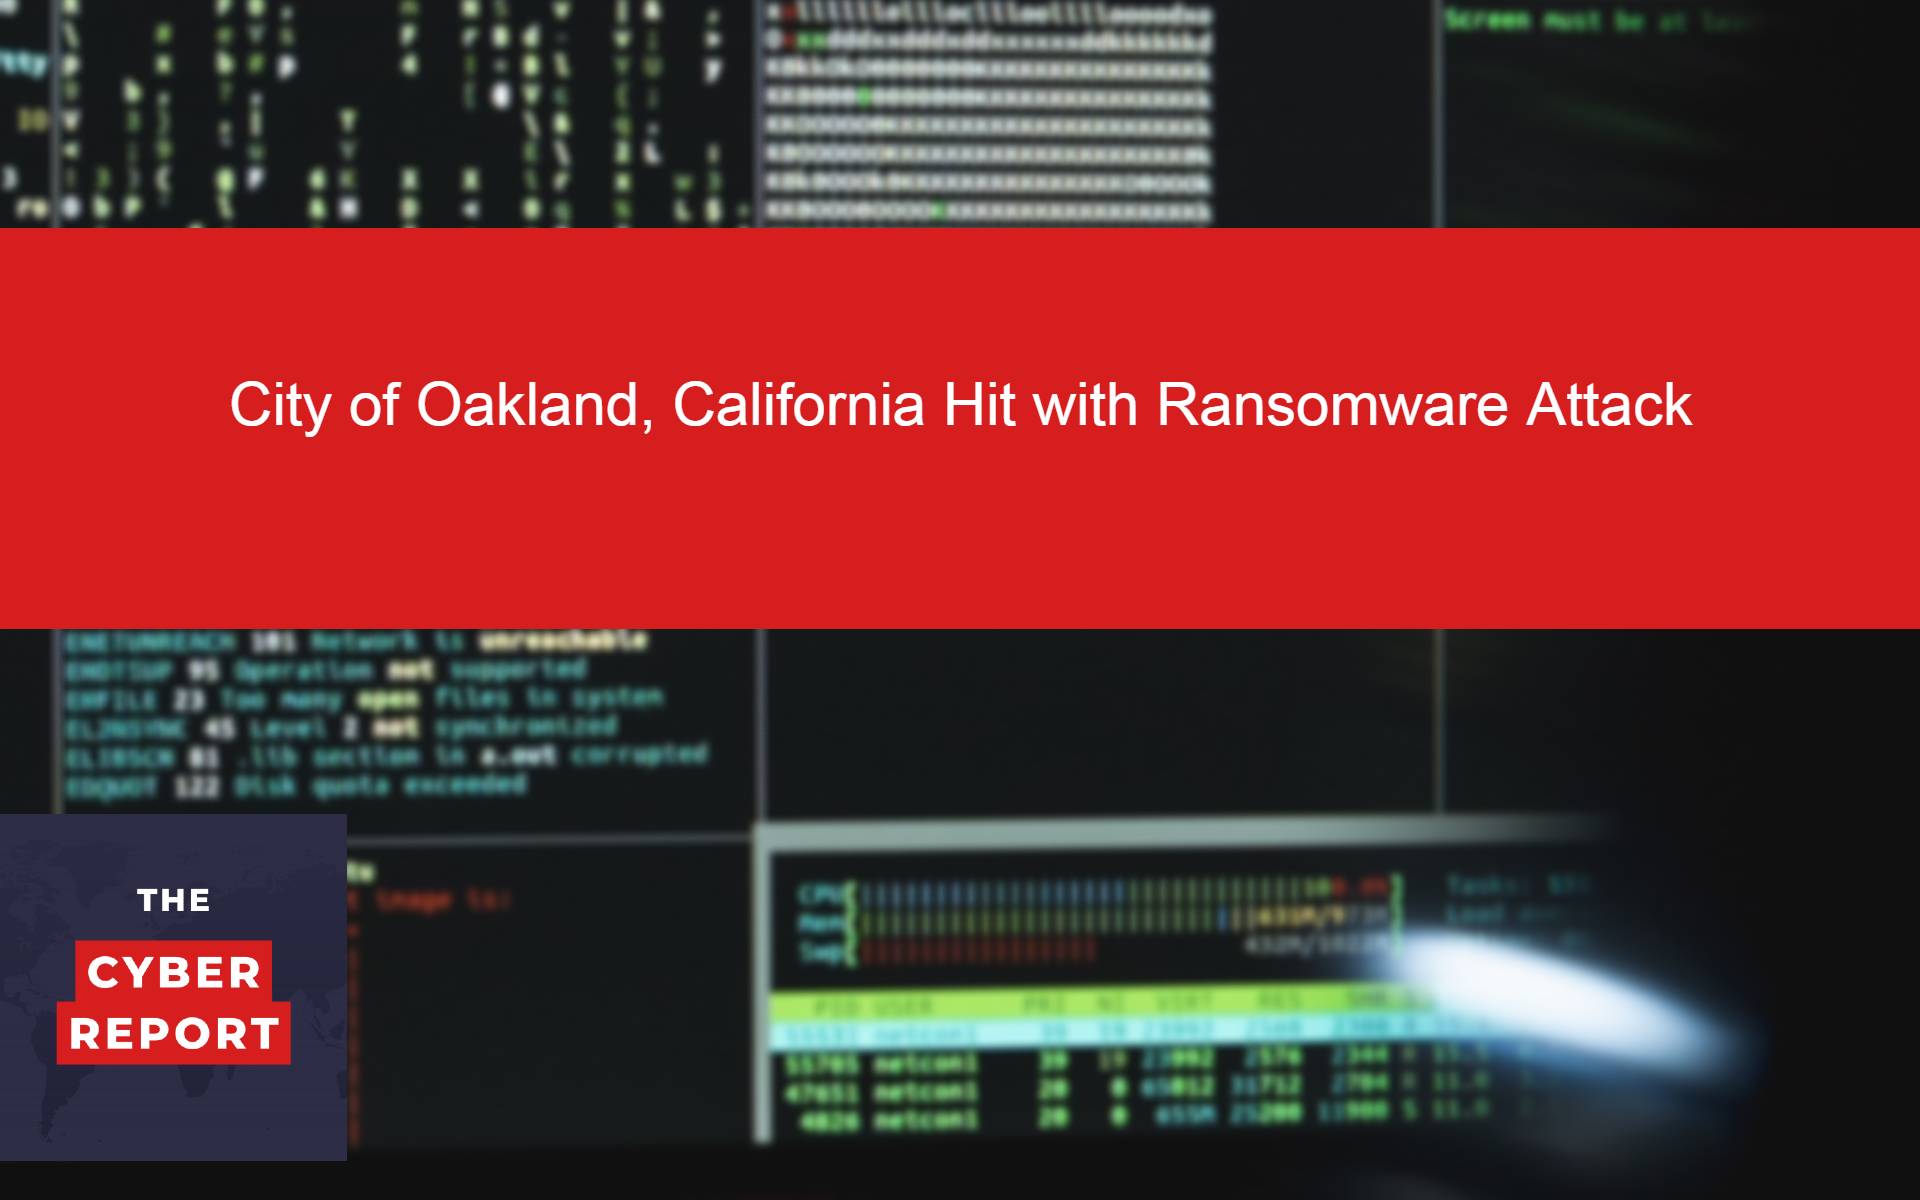 City of Oakland, California Hit with Ransomware Attack